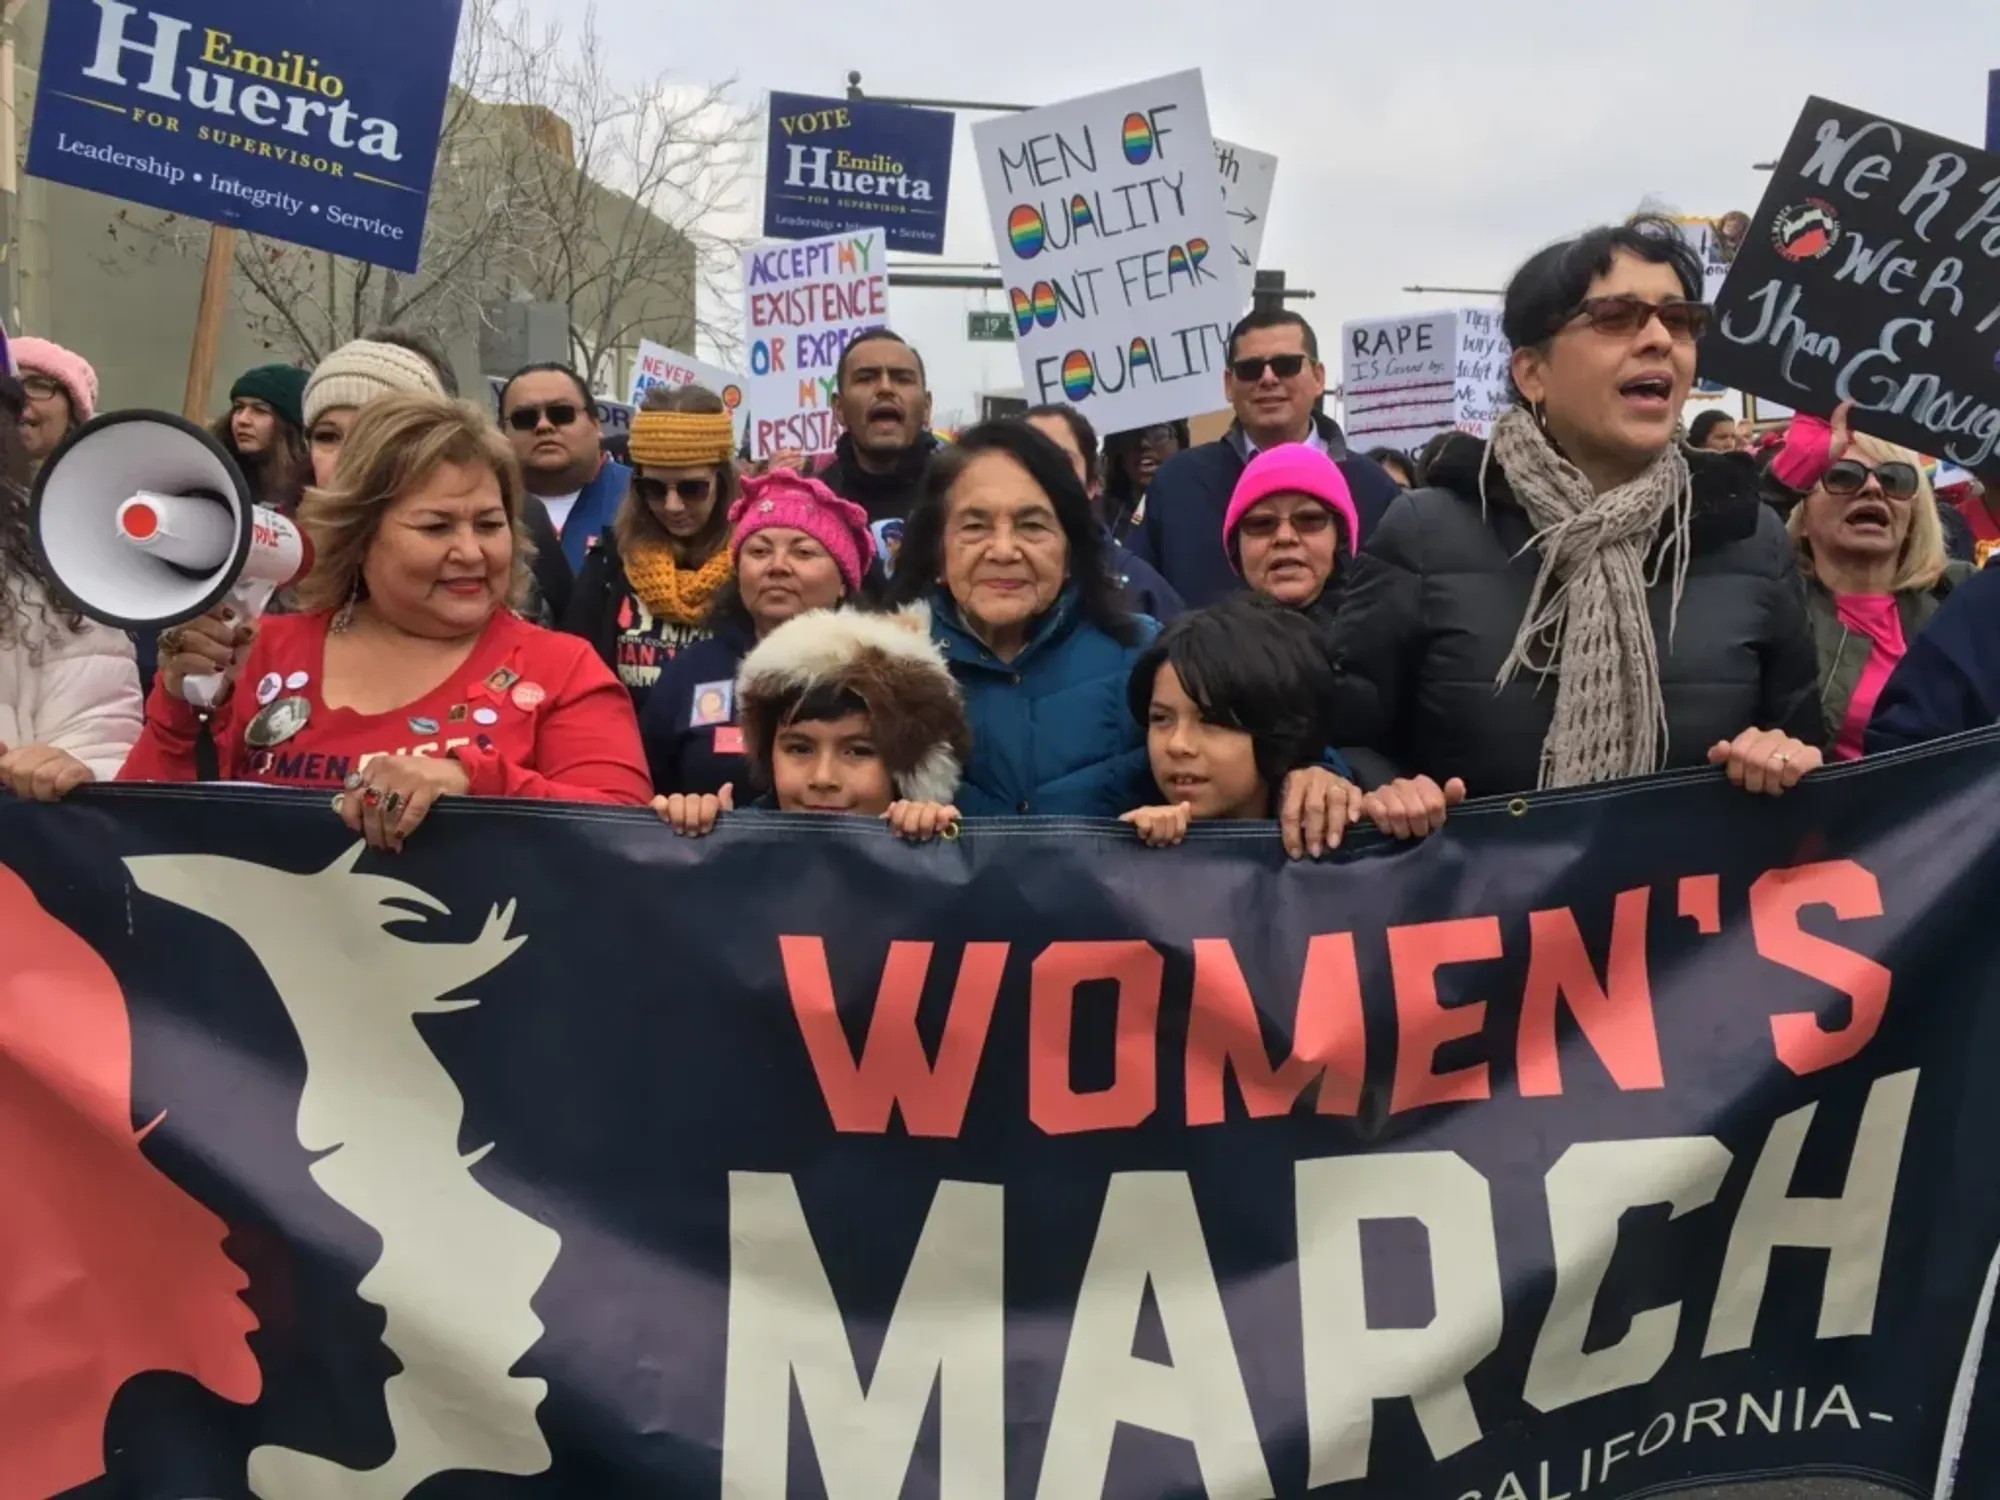 Dolores Huerta at a march for women's rights